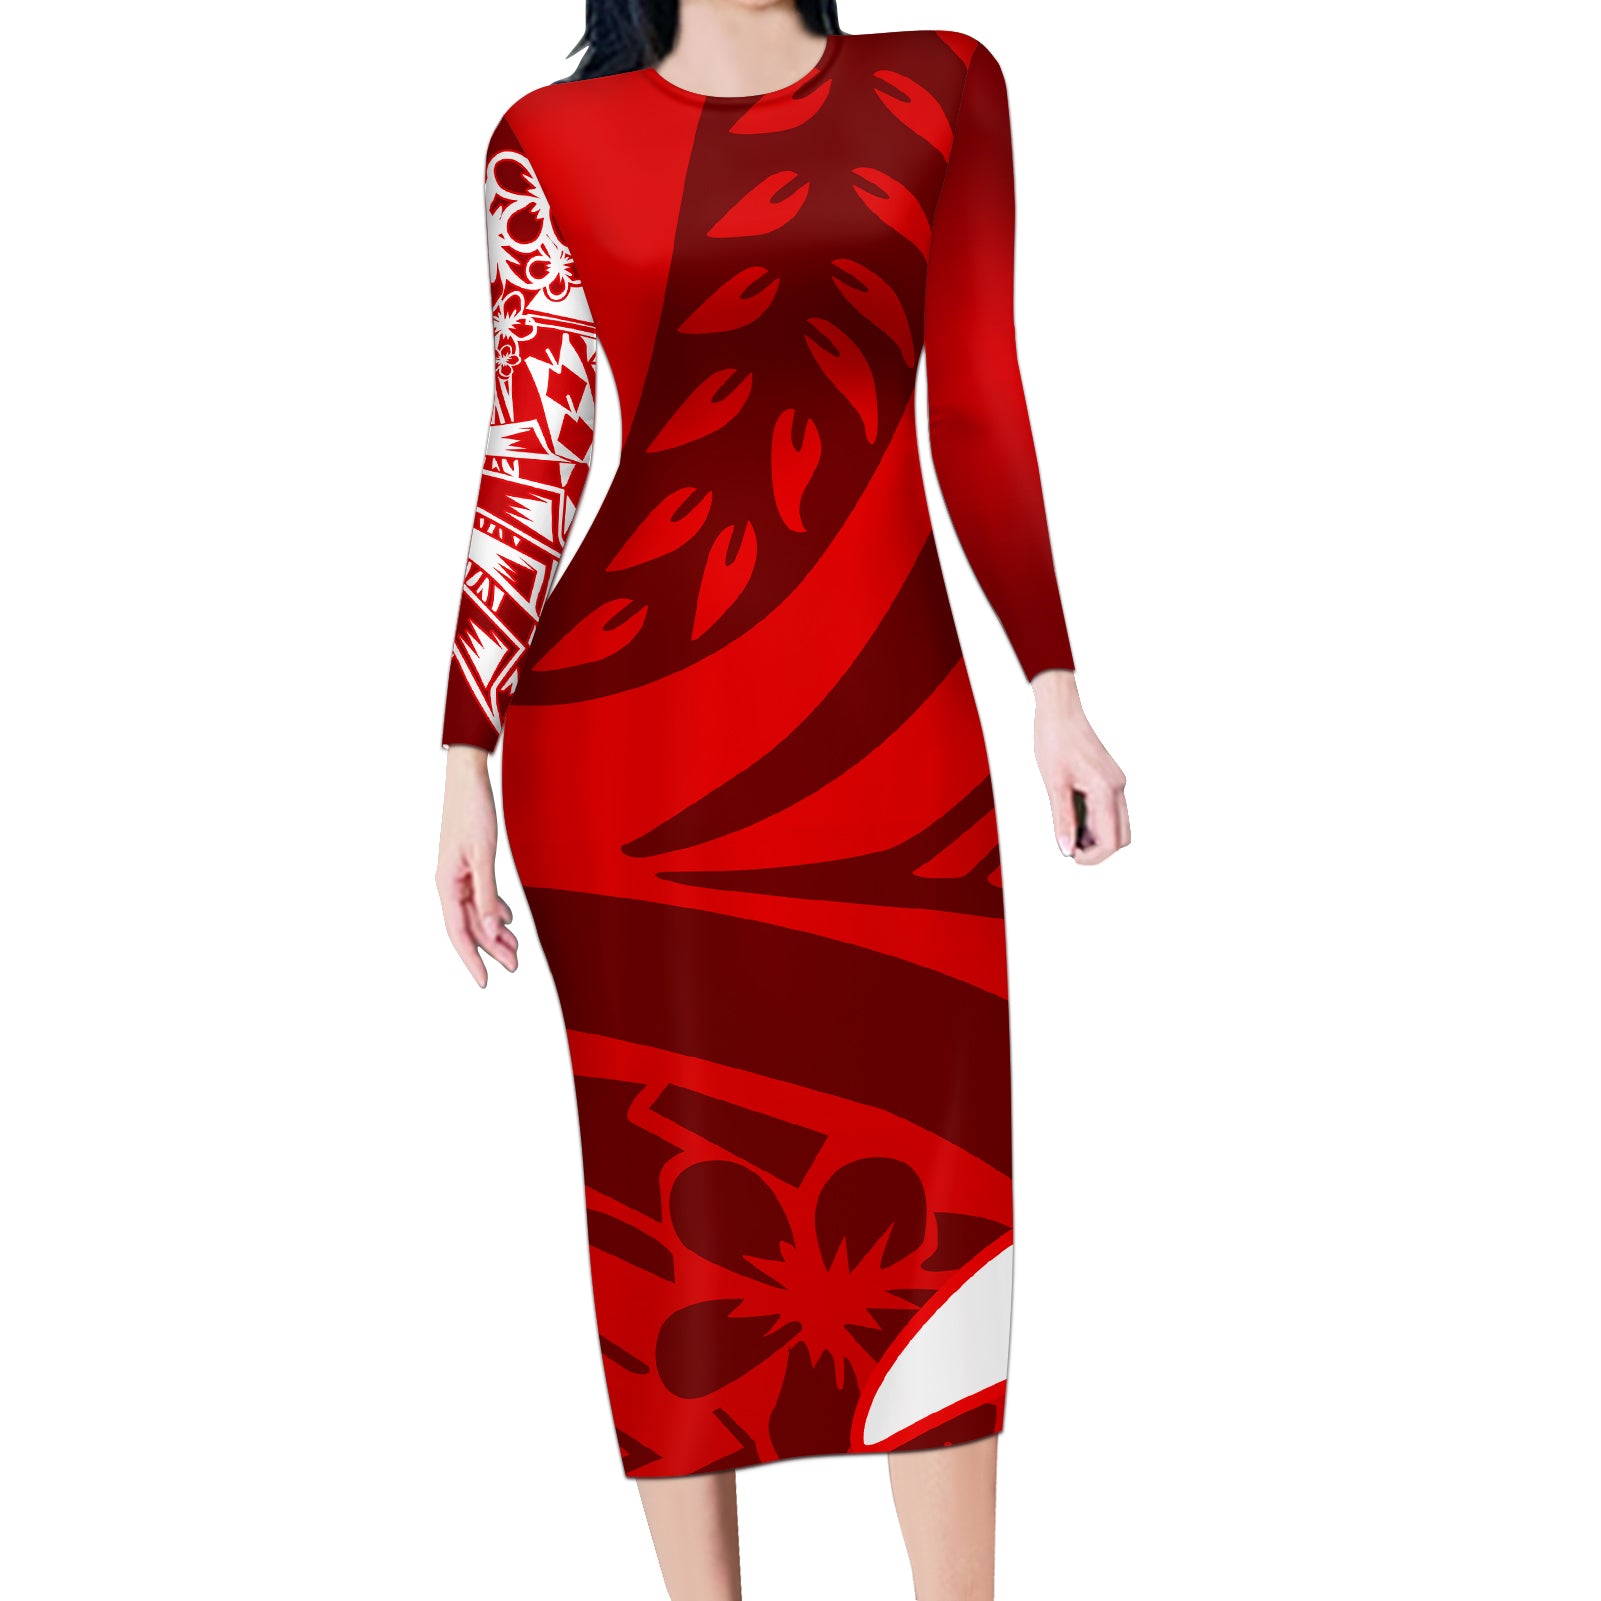 Polynesian Long Sleeve Bodycon Dress Pacific Flower Mix Floral Tribal Tattoo Red Vibe LT9 Long Dress Red - Polynesian Pride